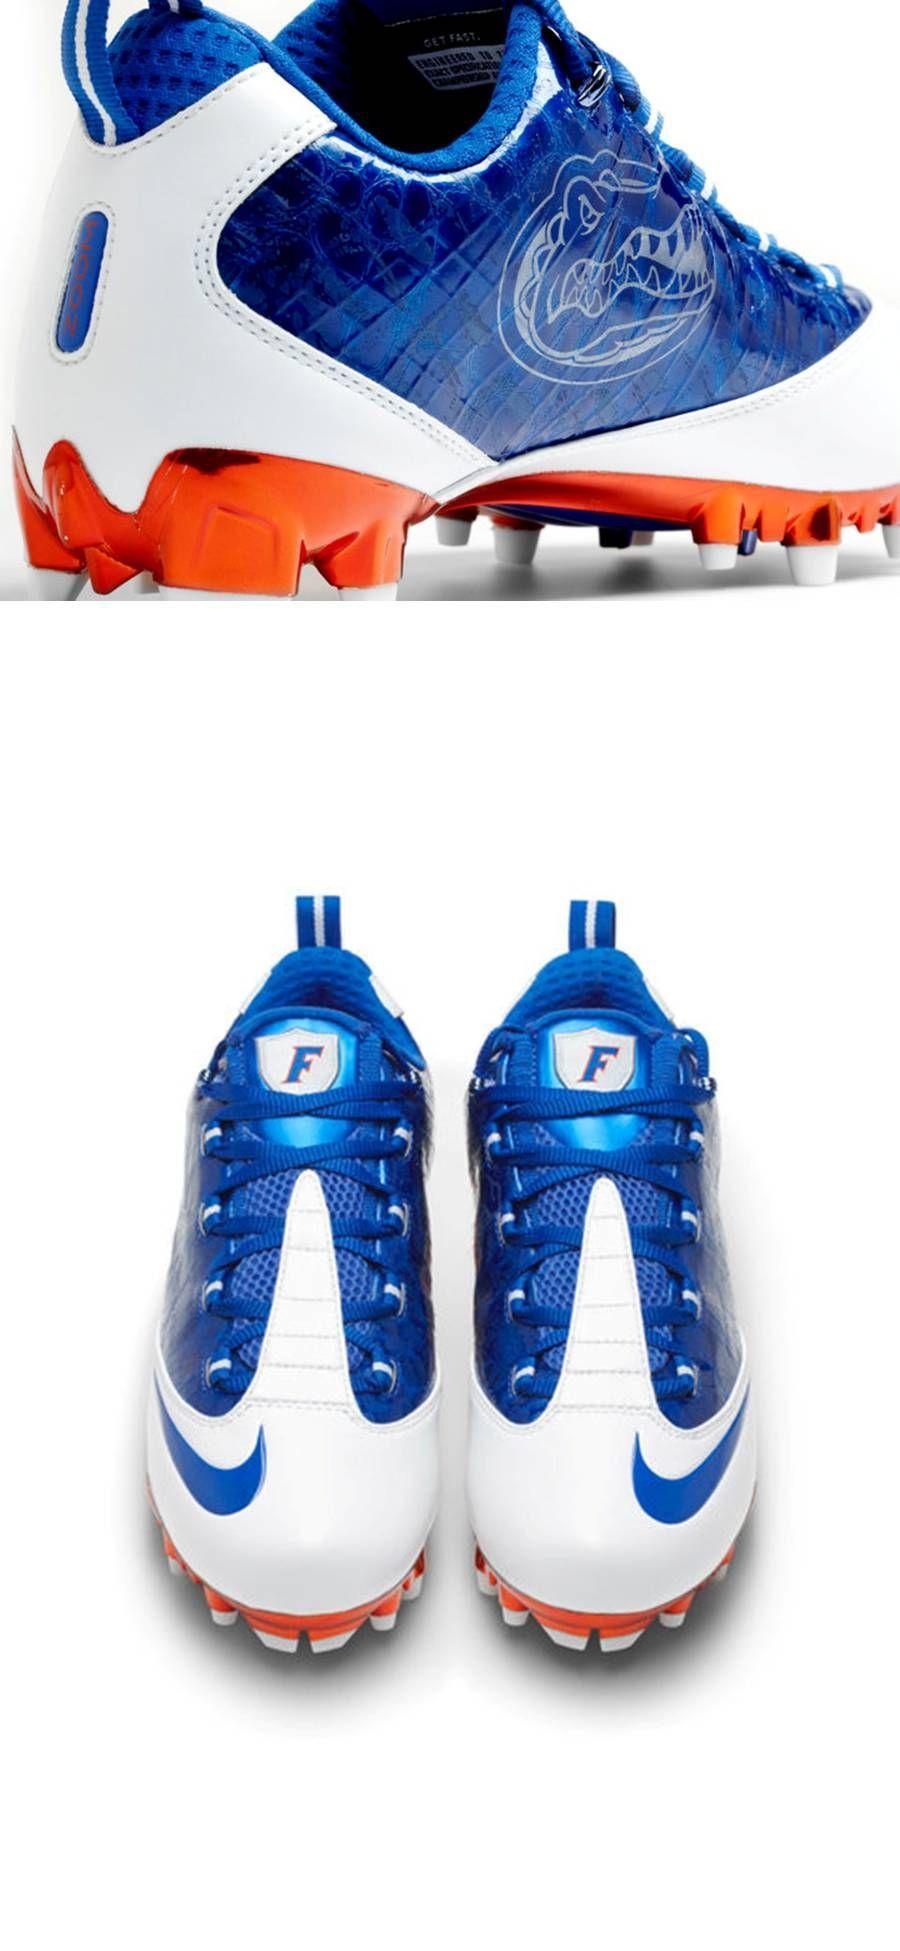 Cleats Logo - University of Florida Gators game cleats with logo views